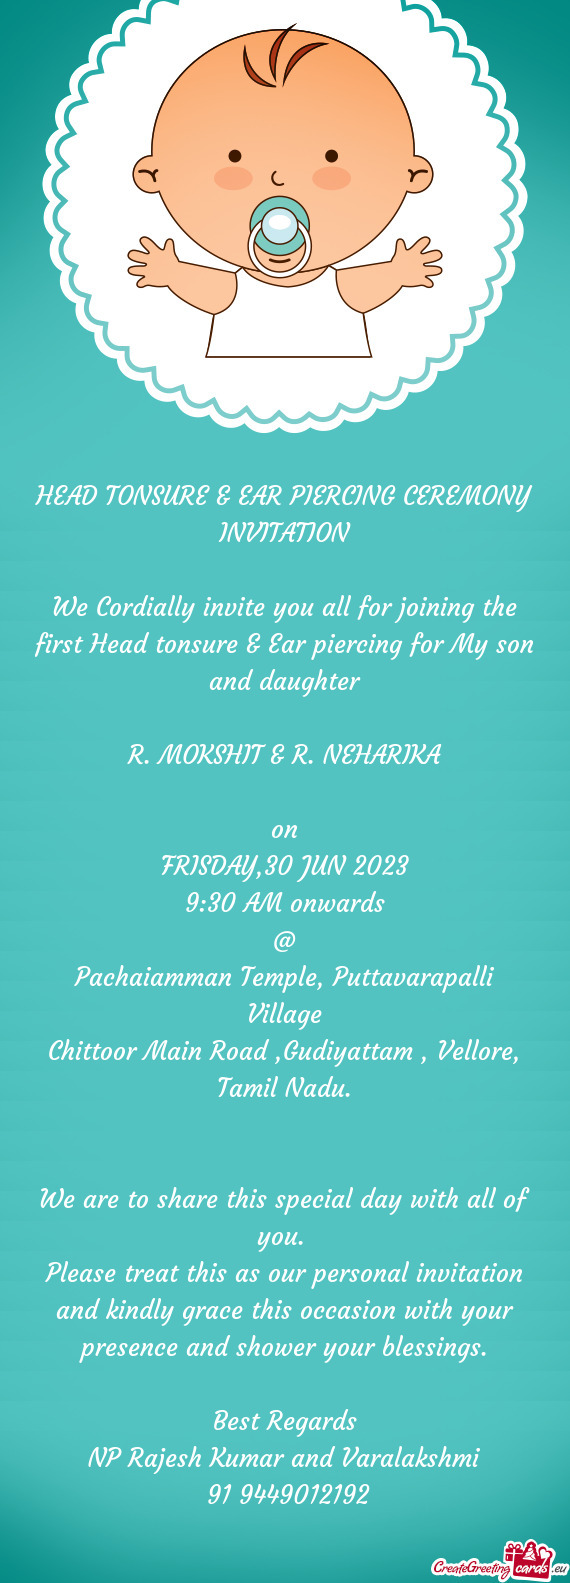 We Cordially invite you all for joining the first Head tonsure & Ear piercing for My son and daughte